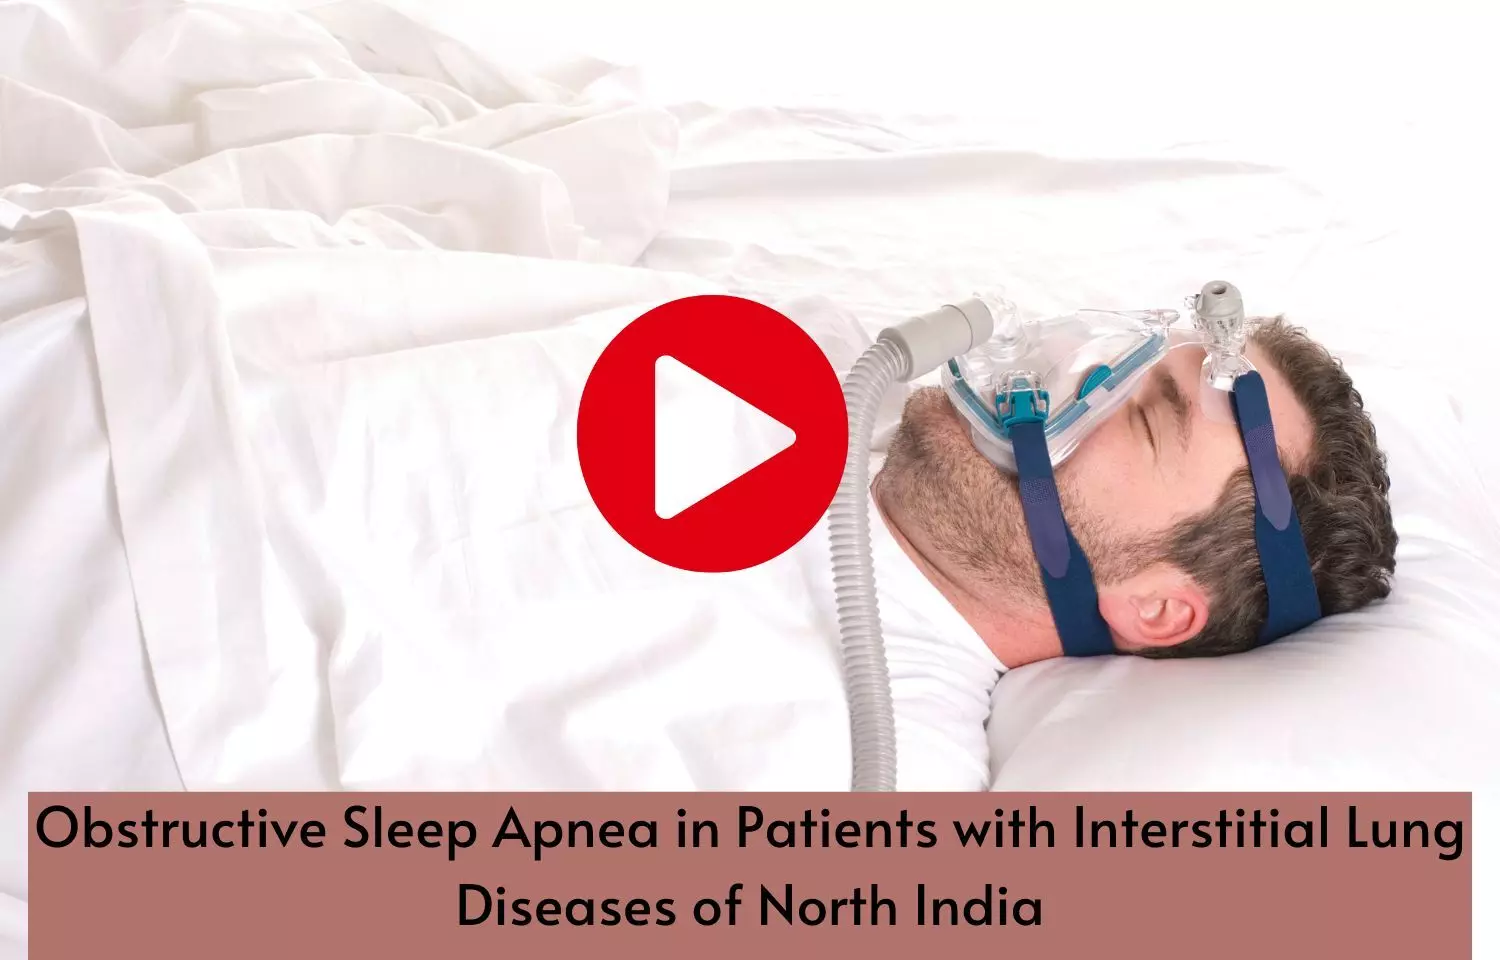 Obstructive Sleep Apnea in Patients with Interstitial Lung Diseases of North India